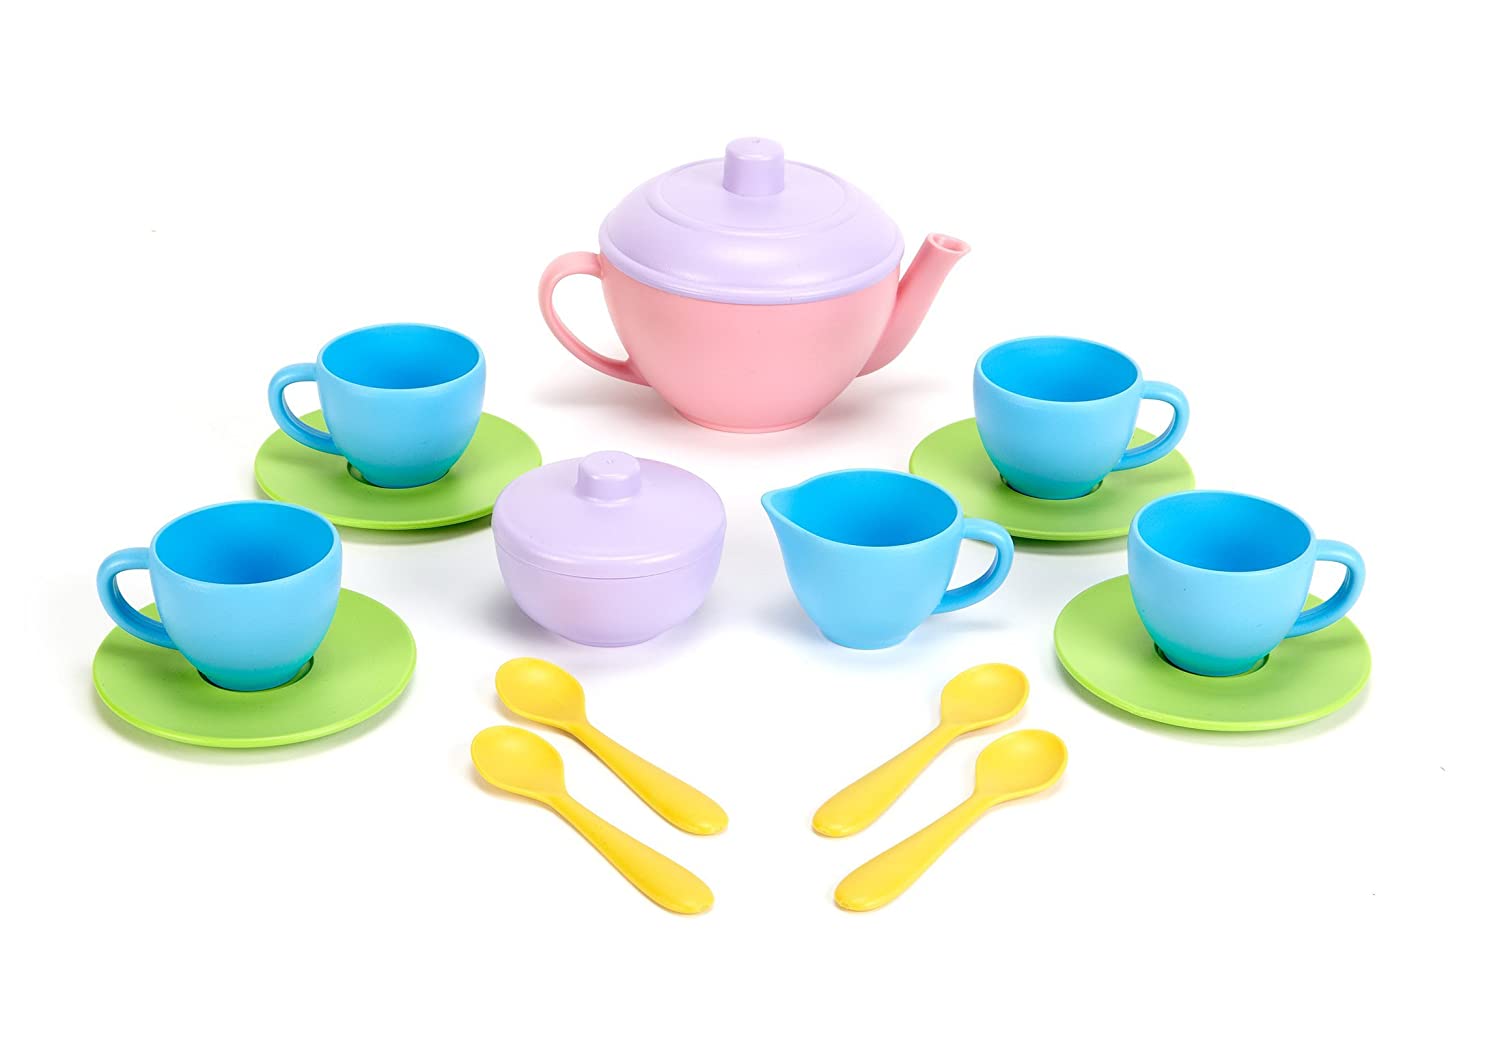 9 Best Kids Tea Sets 2022 - Buying Guide & Reviews 1